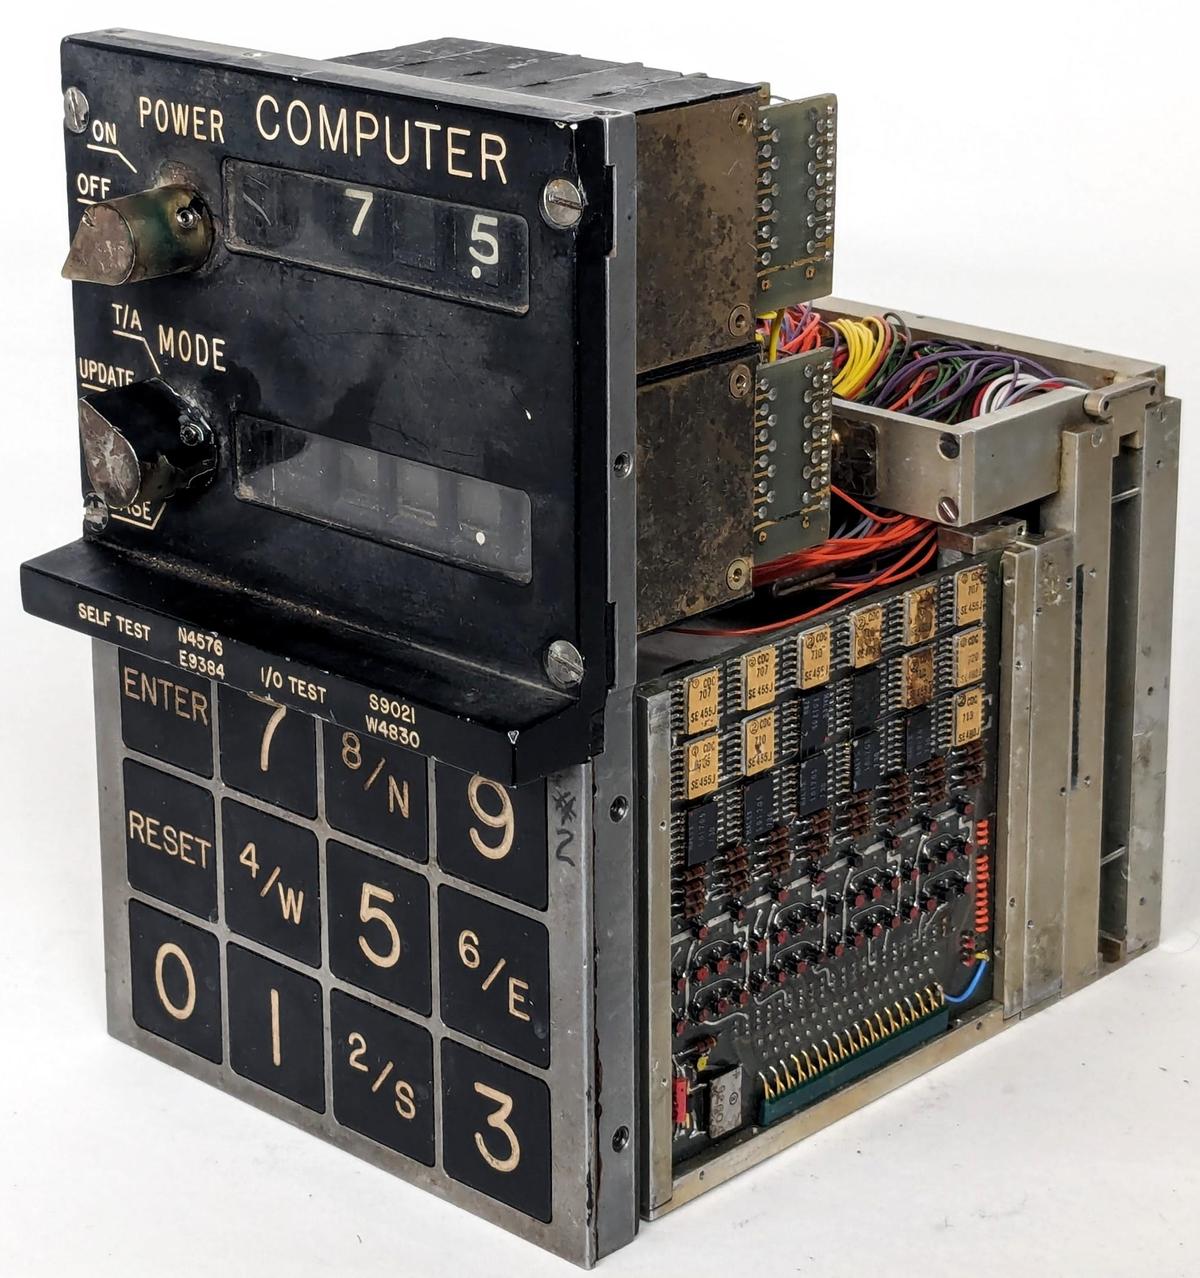 The navigation computer, showing the front panel with the display and keyboard, with the electronics unit behind it. Click this image (or any other) for a larger version.